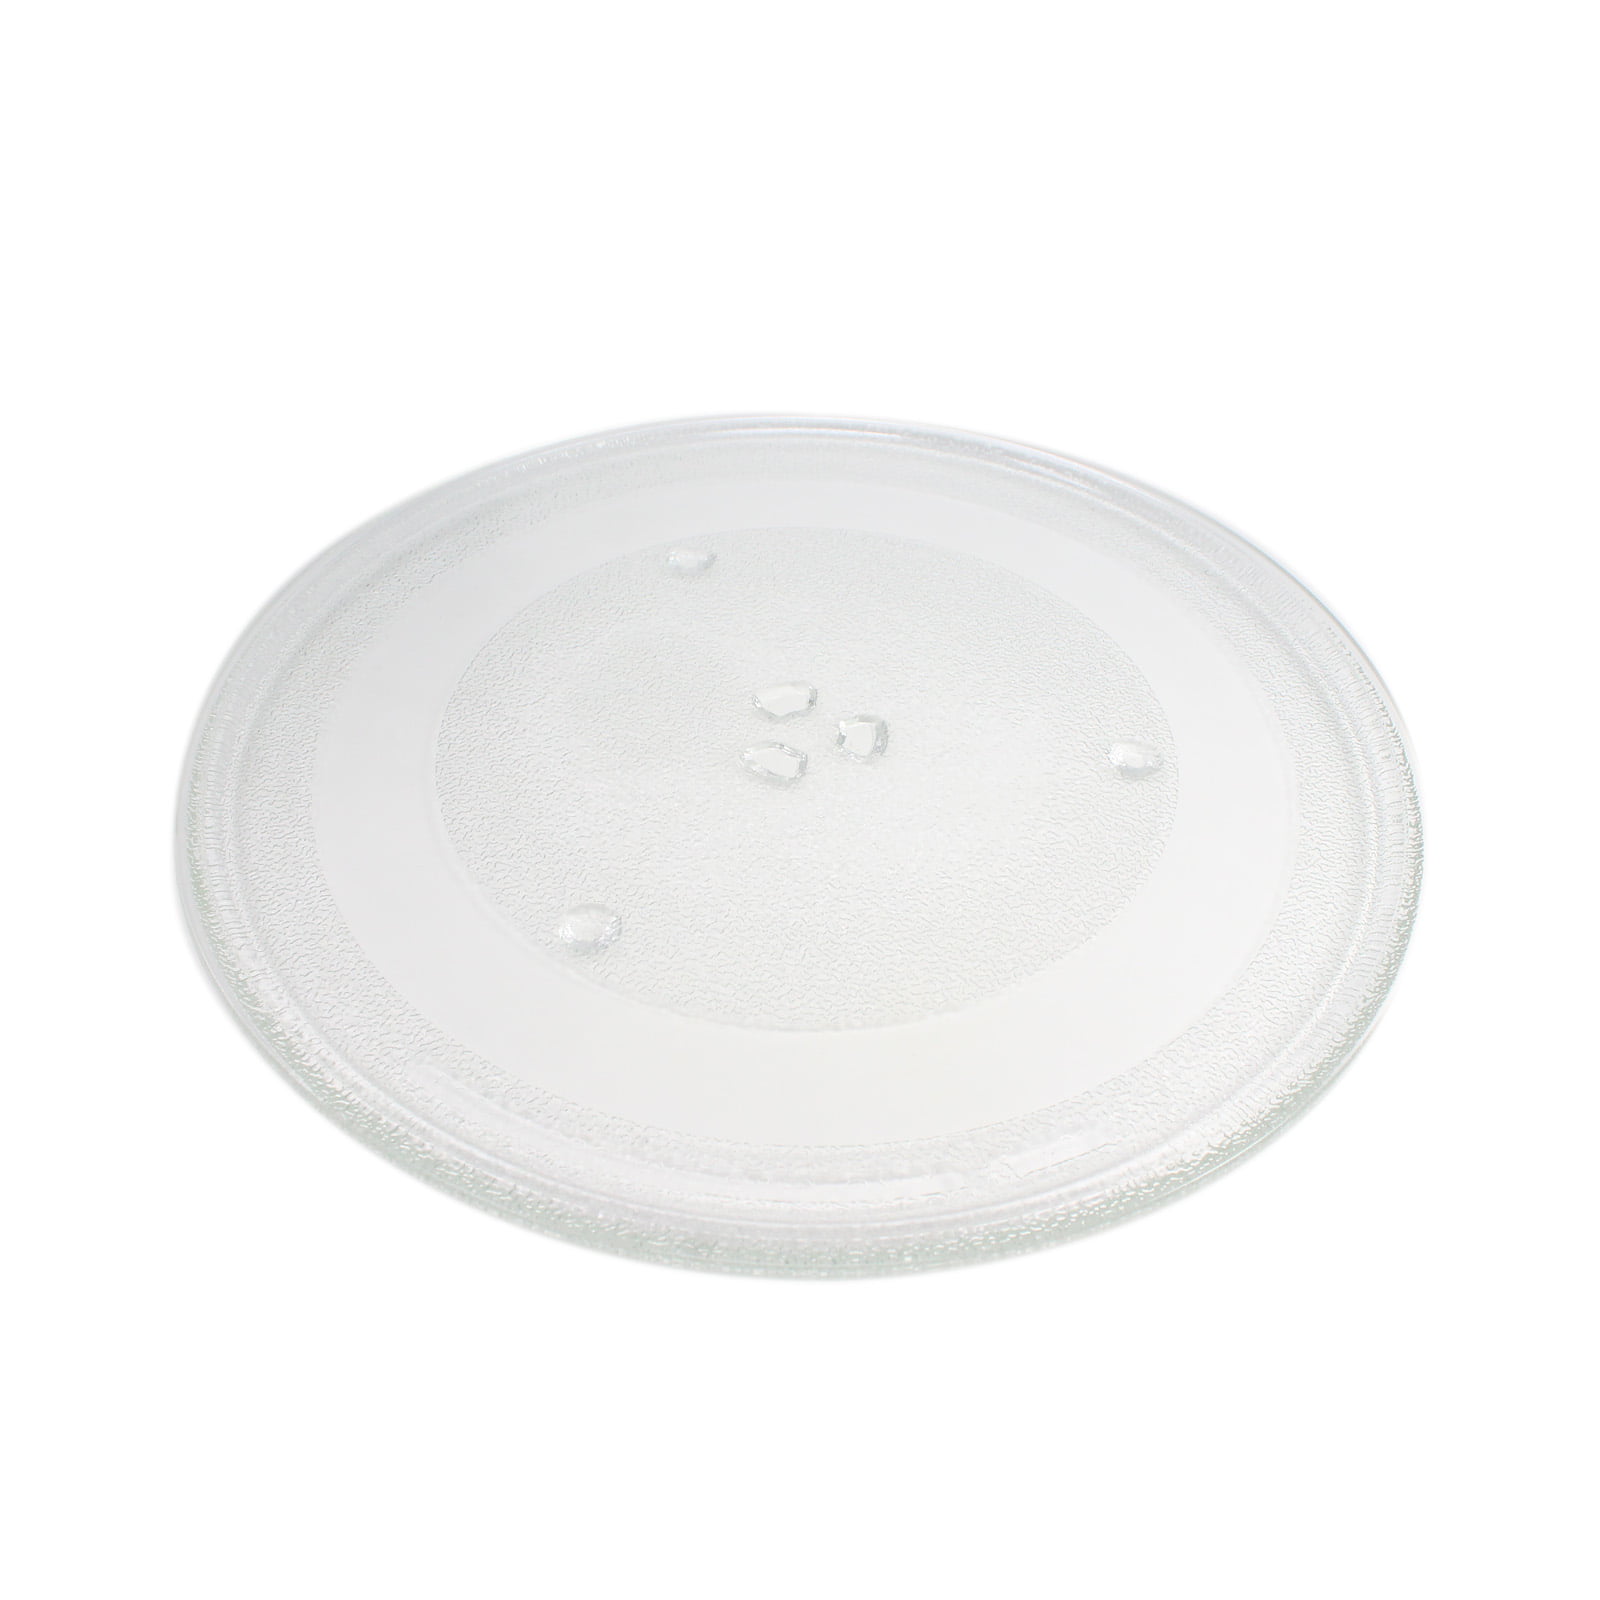 K25MSS11 Kenwood Microwave Glass Turntable Plate for K25MMS14,K25MB14 K25MW14 